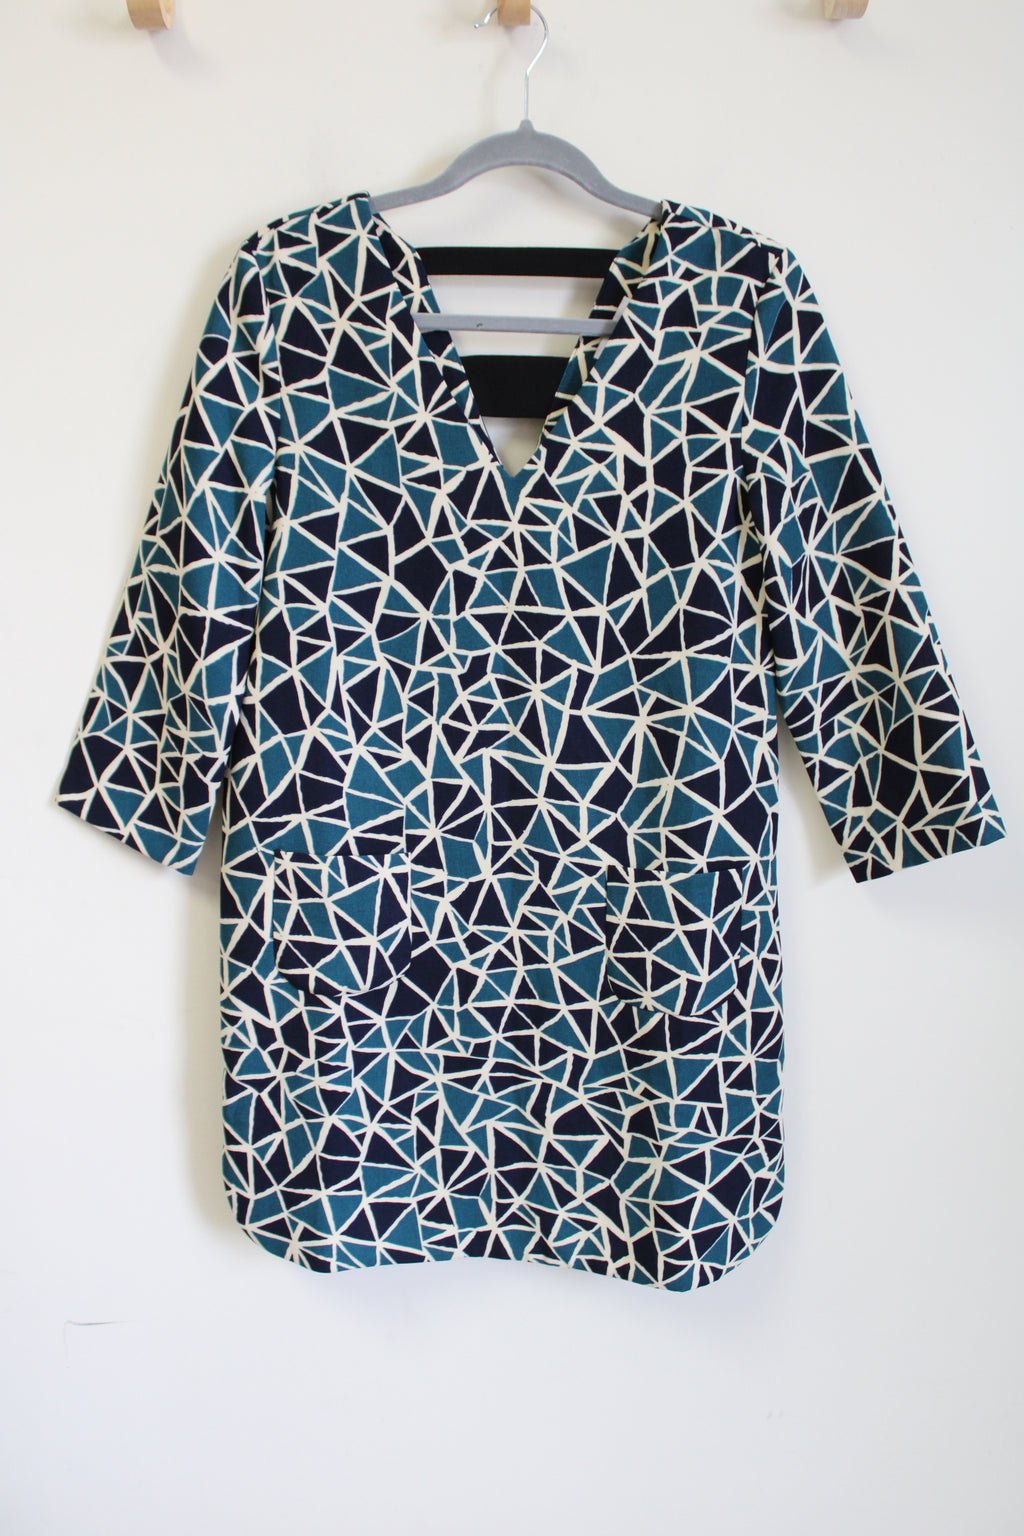 Suncoo Blue & Teal Triangle Patterned Dress | T2 (M)